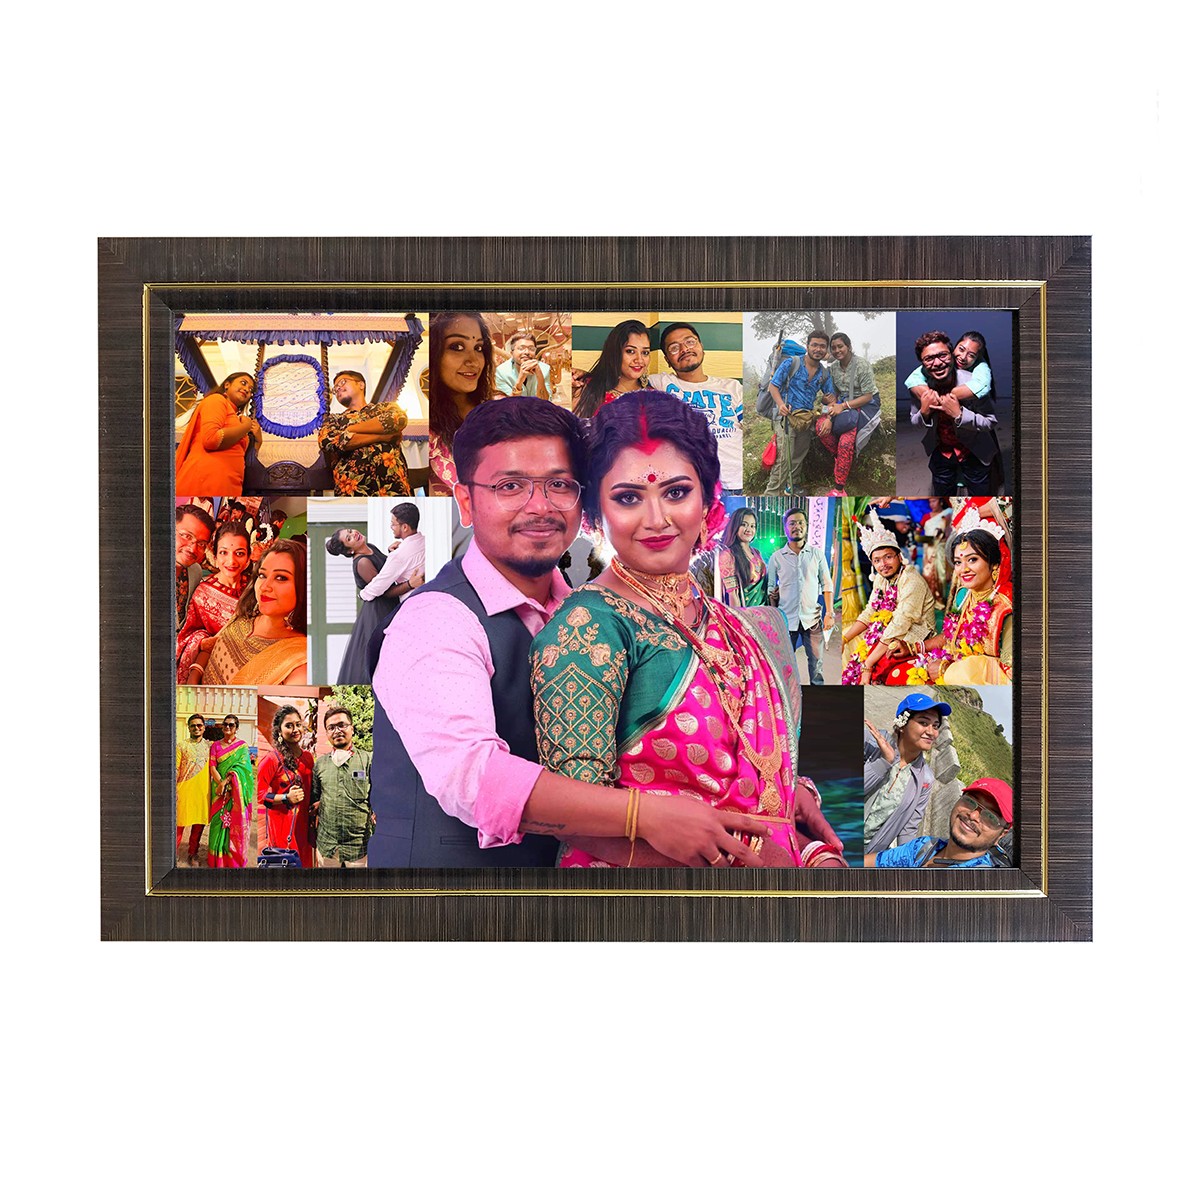 Mosaic Photo Frame Wooden Classic Photo Frame (with 16-26 photos) - Black Colour With Golden Strips Designed, 8"x12"x1" Frame (Copy)